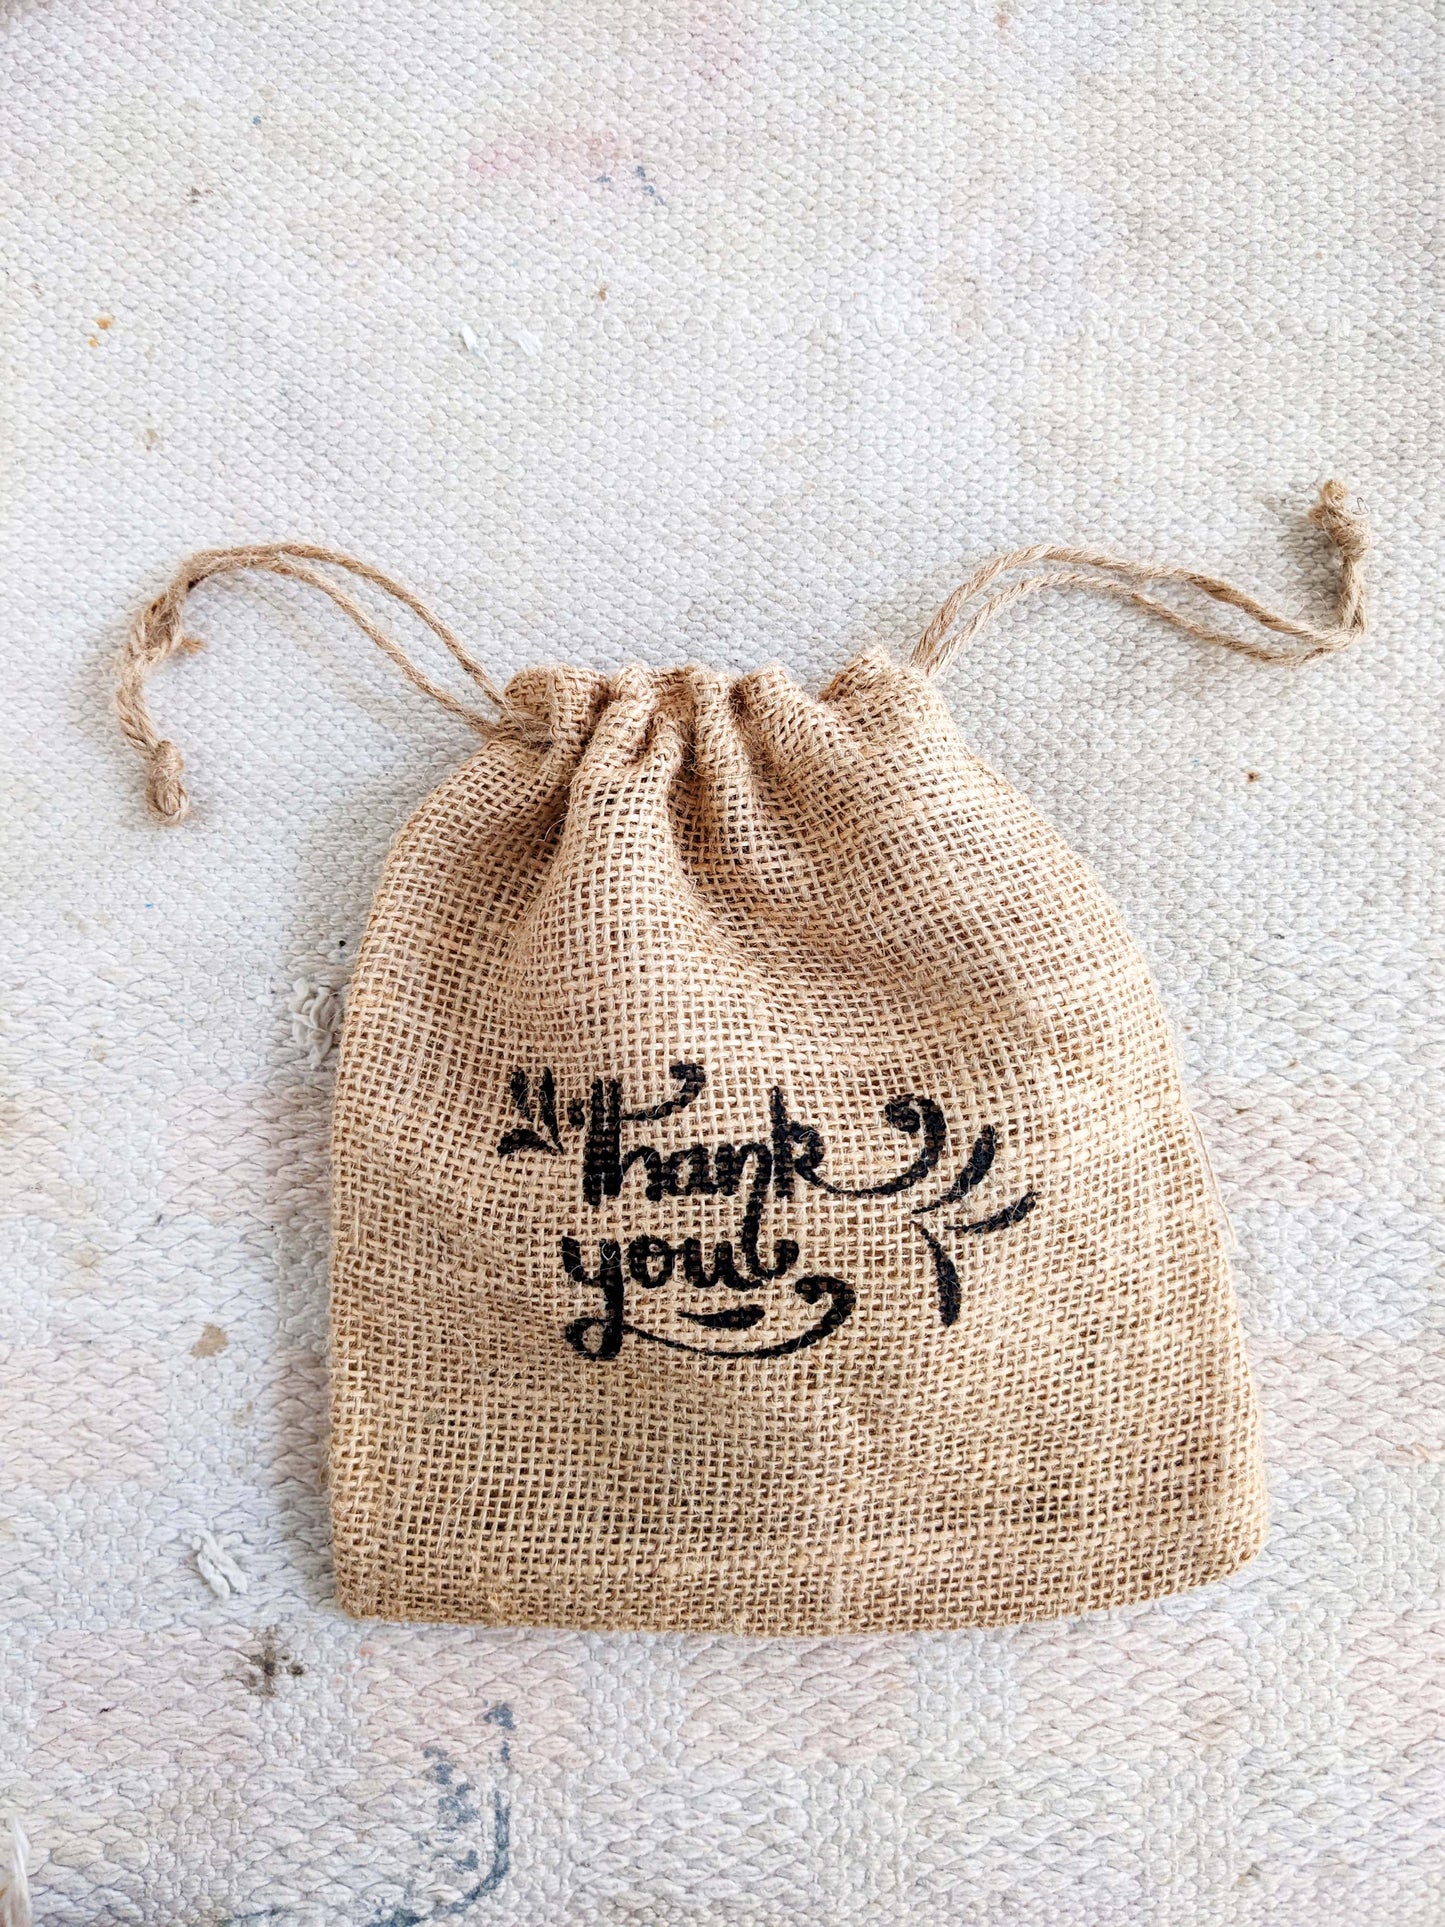 Handmakers Natural Burlap Thank you Drawstring Bags for Gift pouches 7x8 inch